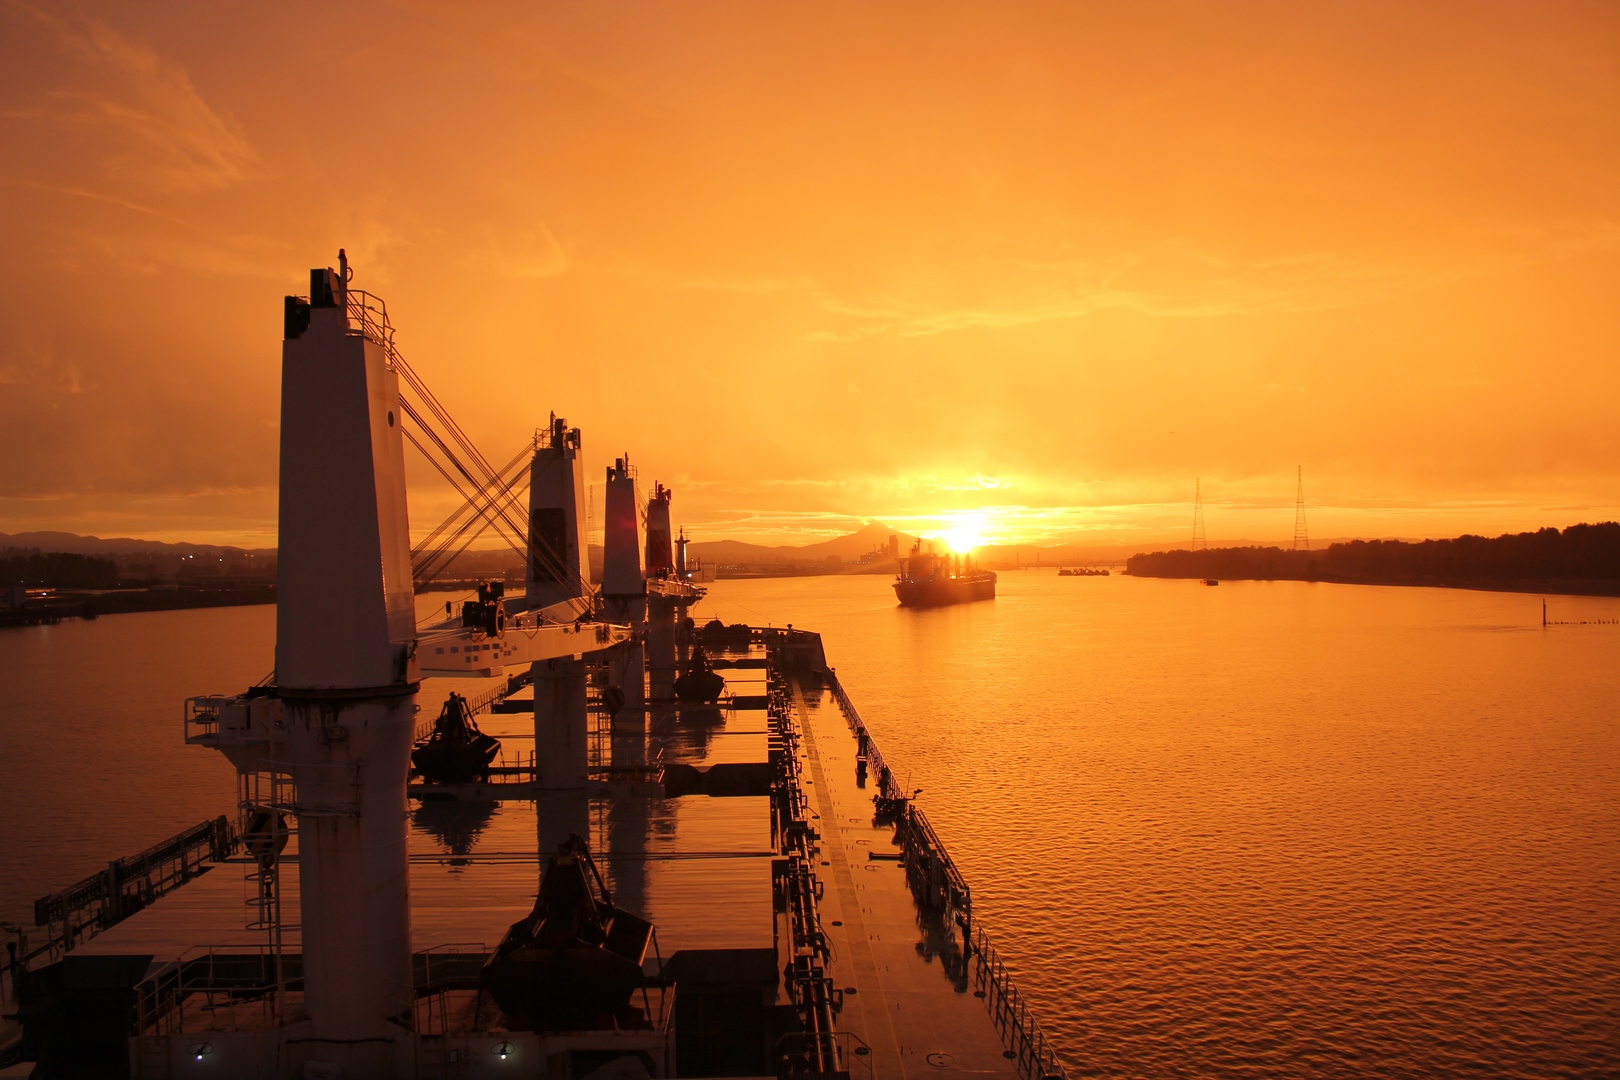 A view of a bulk carrier from the bridge at sunset